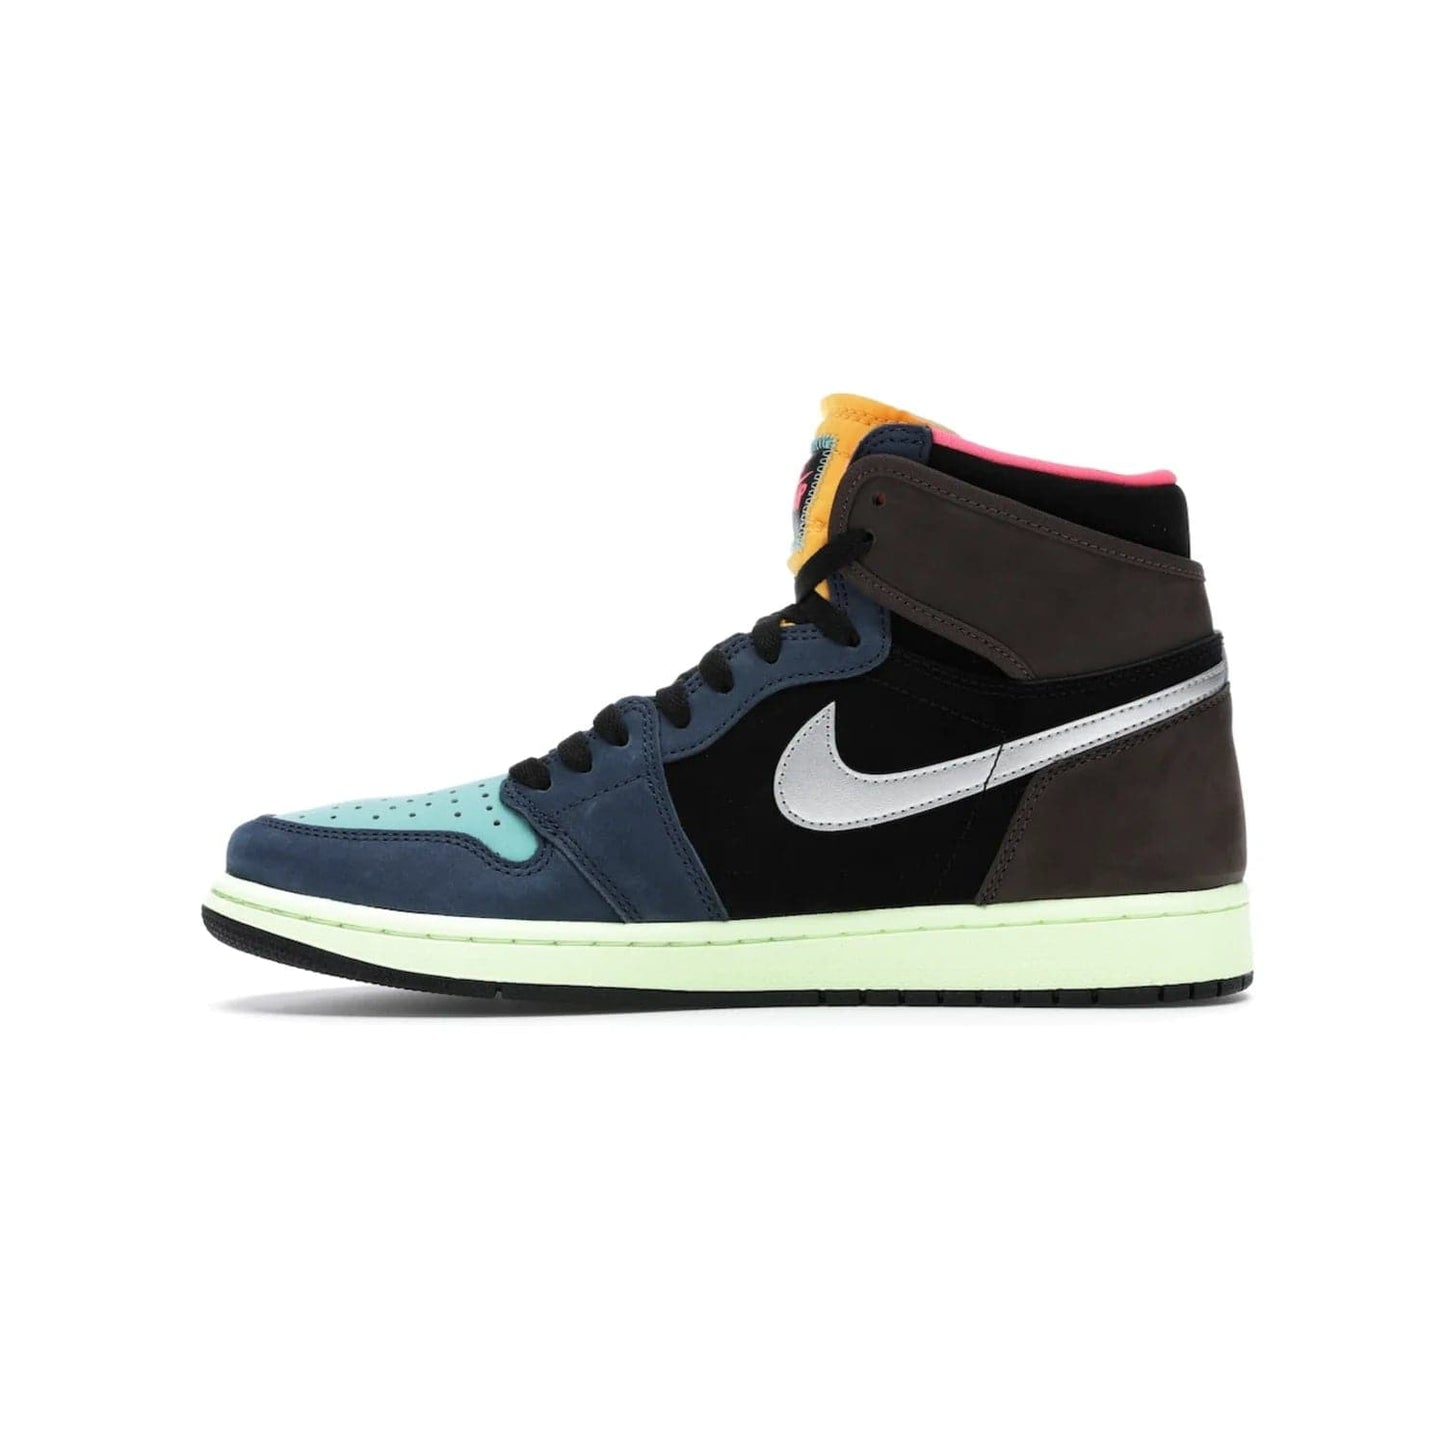 Jordan 1 Retro High Tokyo Bio Hack - Image 19 - Only at www.BallersClubKickz.com - Step up your sneaker game with the Air Jordan 1 Retro High Tokyo Bio Hack! Unique design featuring multiple materials and eye-catching colors. Metallic leather Swoosh and light green midsole for a stunning look. Available now for just $170.